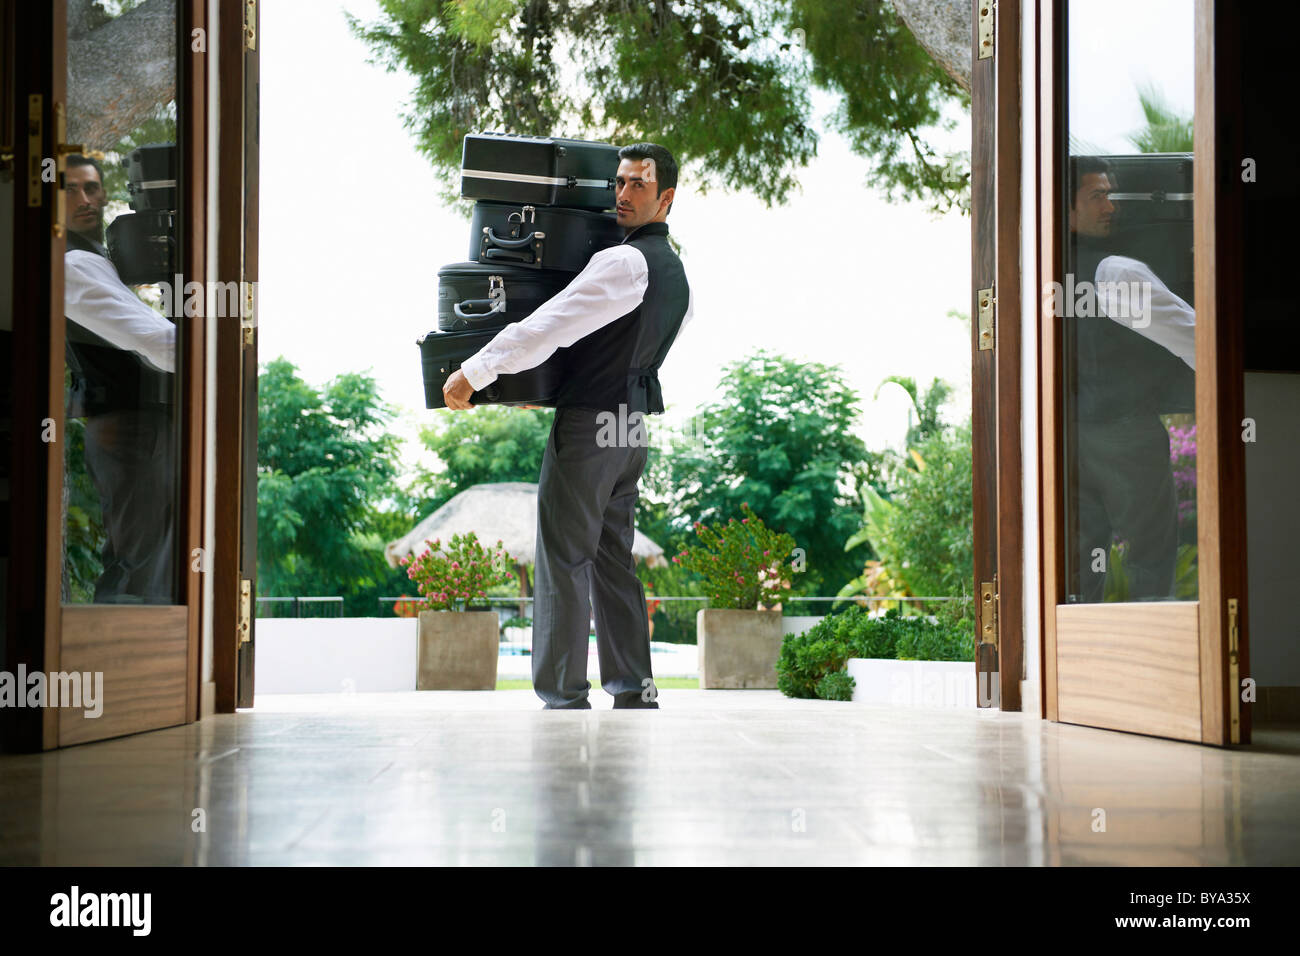 Man carrying suitcases into hotel Stock Photo